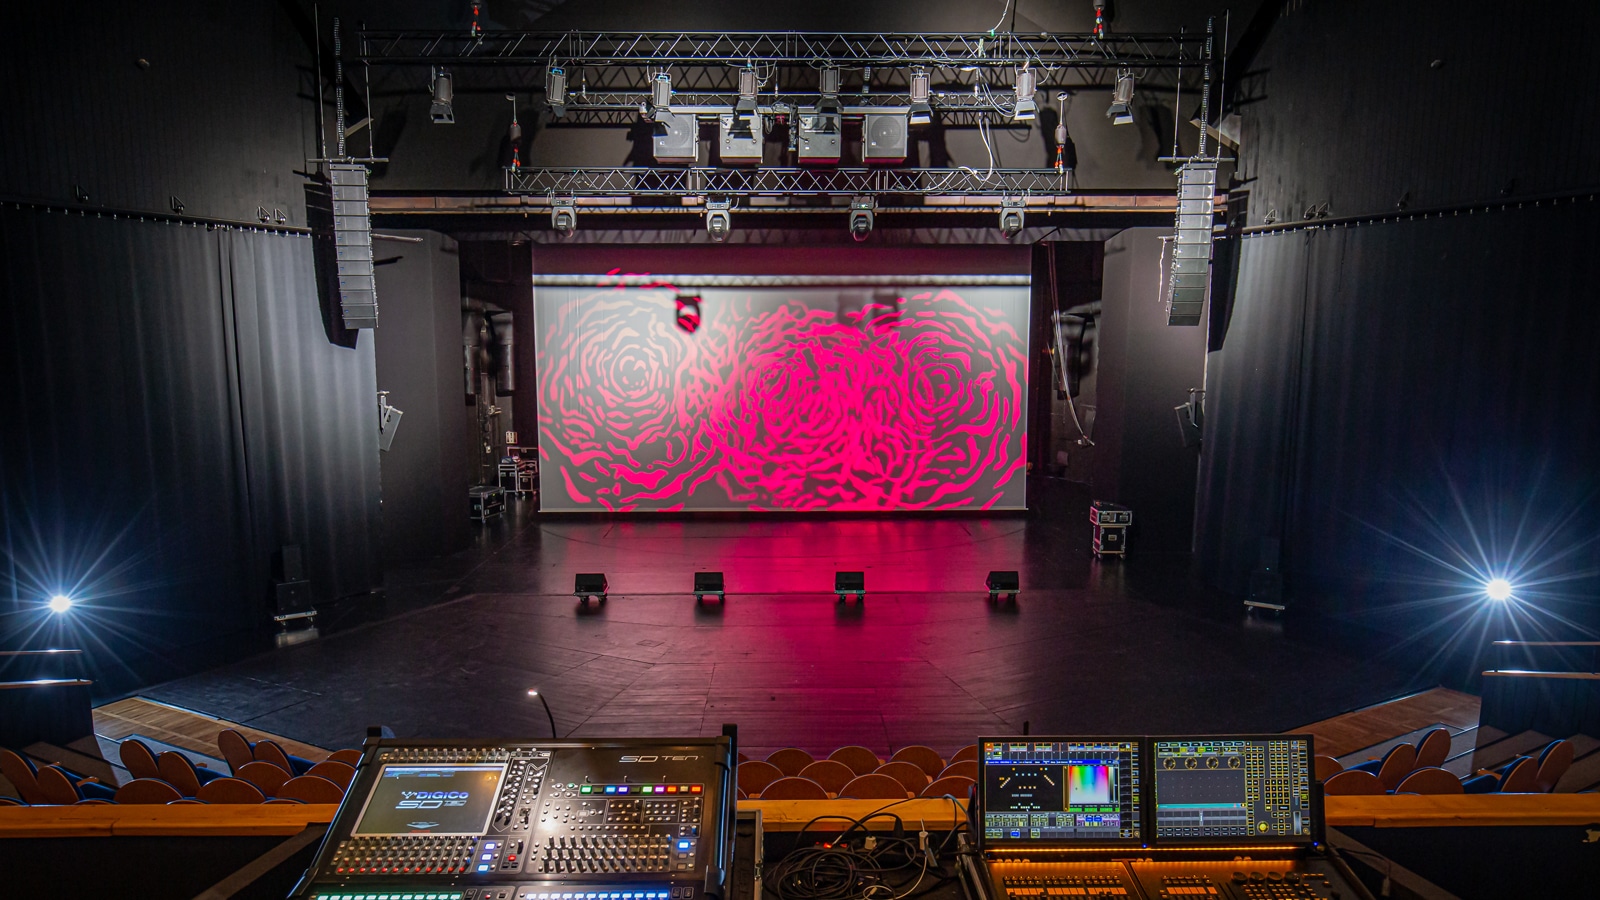 Meyer Sound Upgrade Brings Transparency, Power, and Flexibility to Prestigious Polish Theater